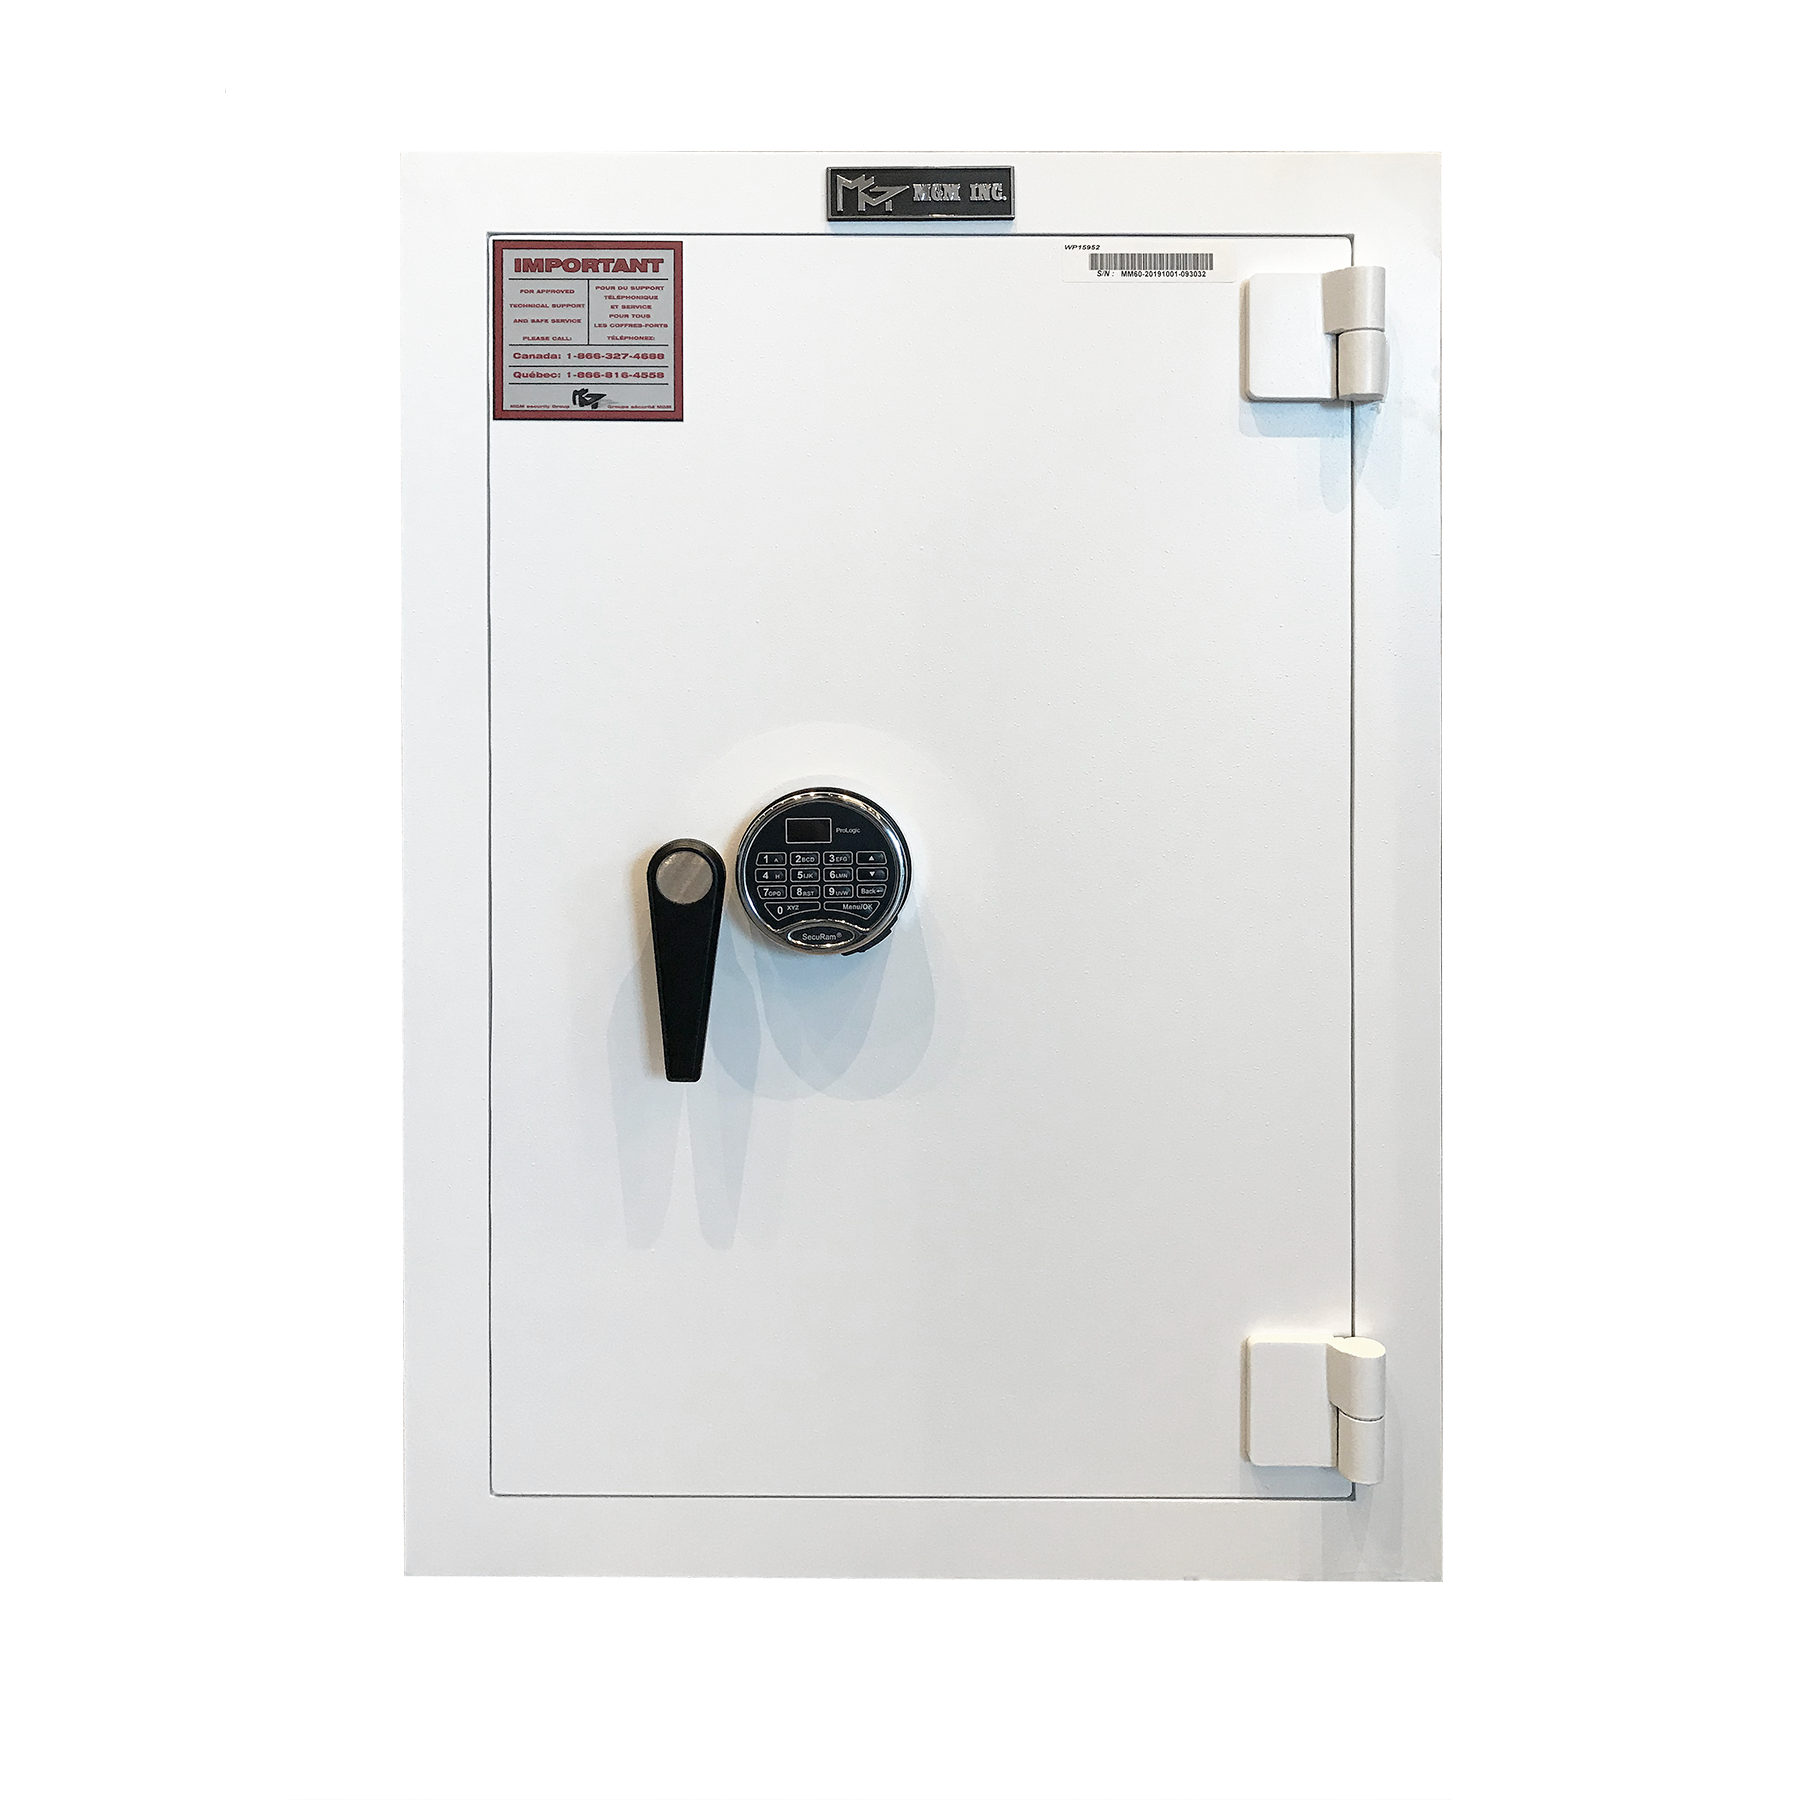 B-3524 Pharmacy Safe with Time Delay Lock